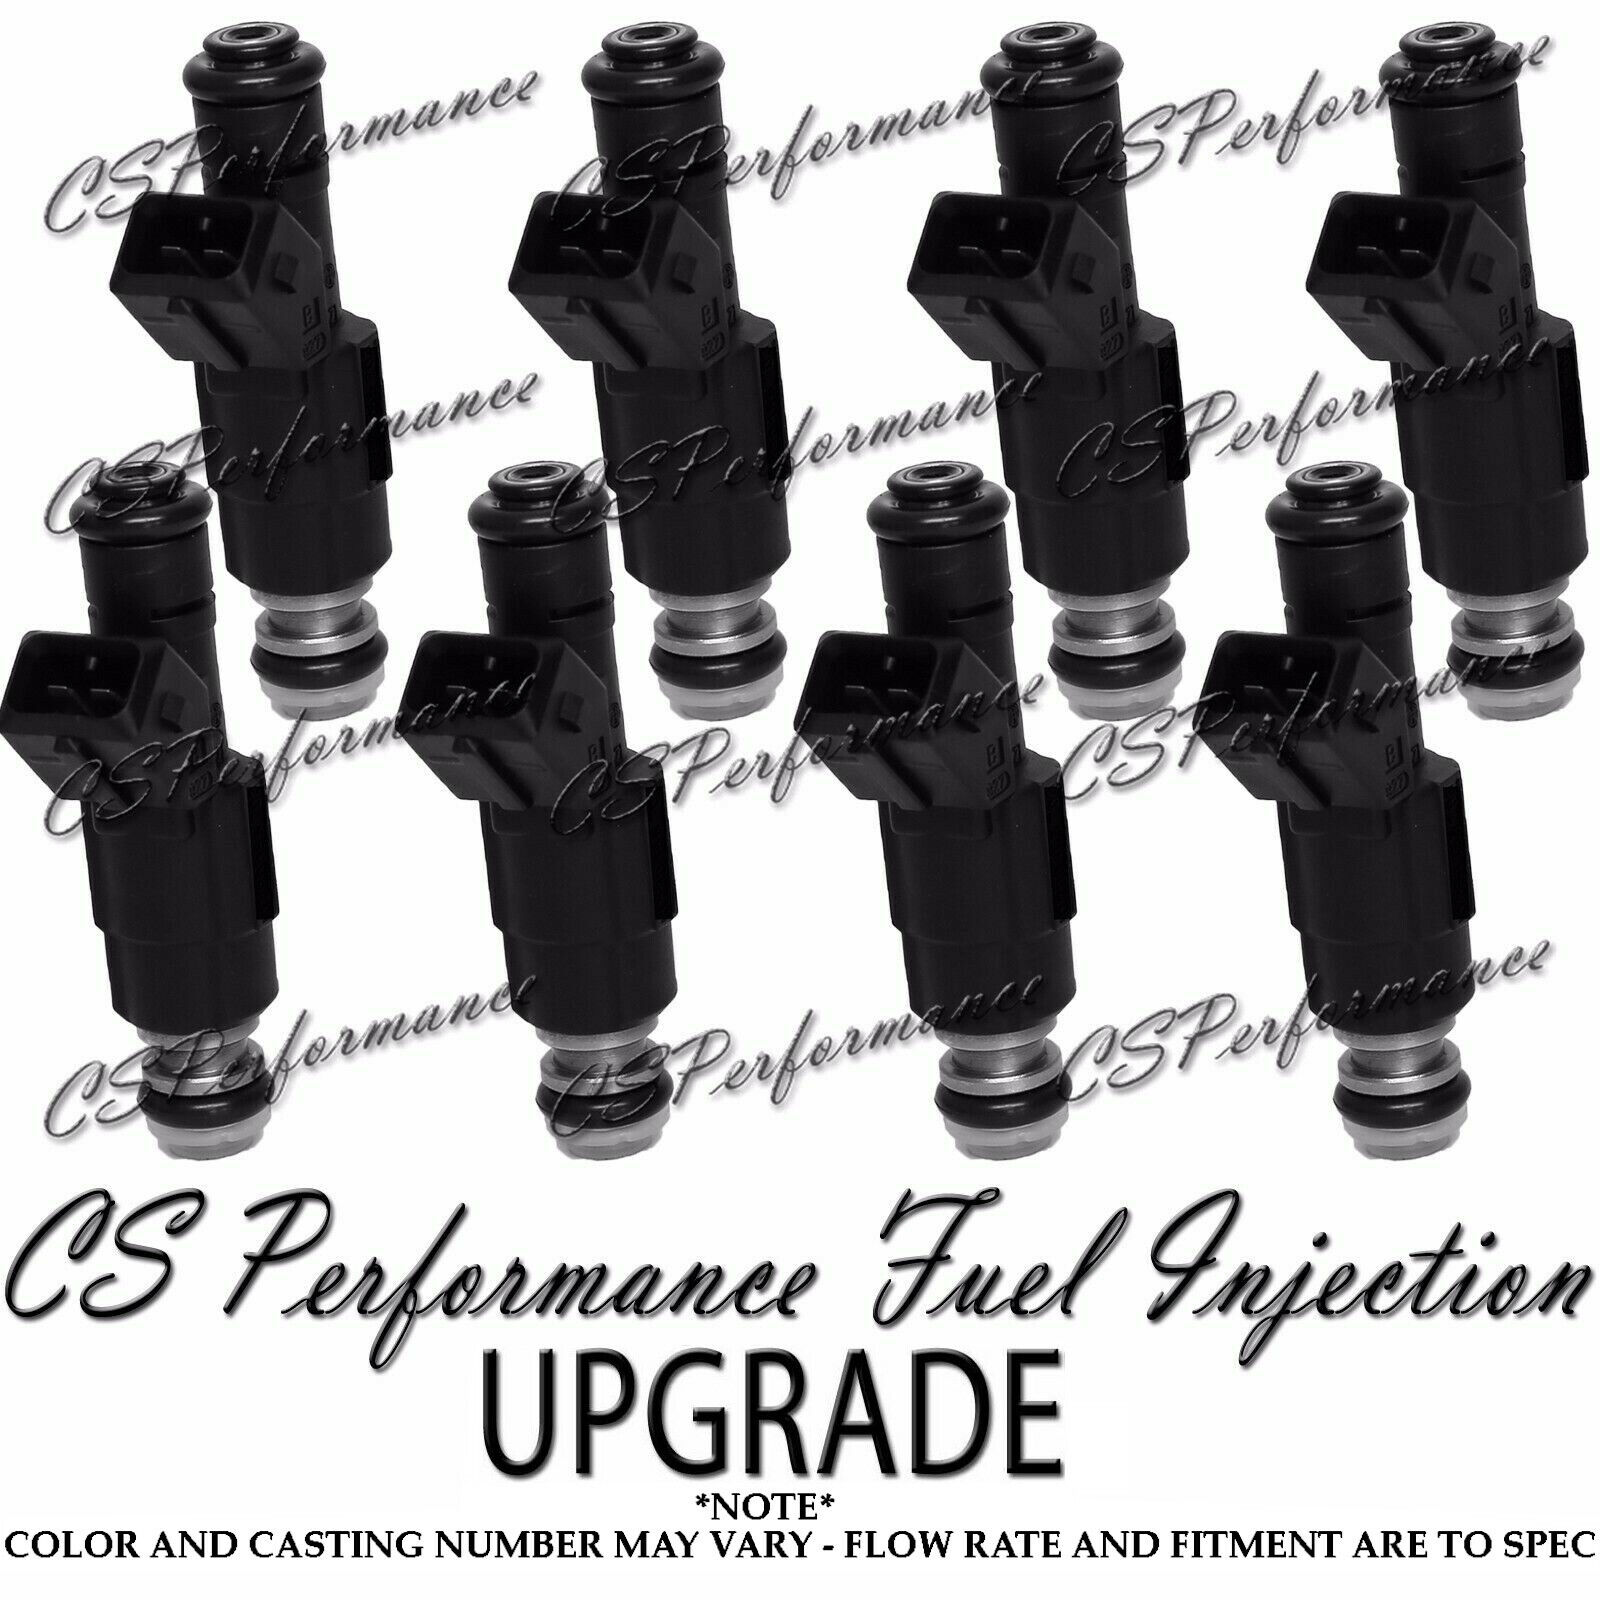 Bosch III UPGRADE Fuel Injectors for Ford V8 5.0 5.8 302 351 Replaces 0290150718